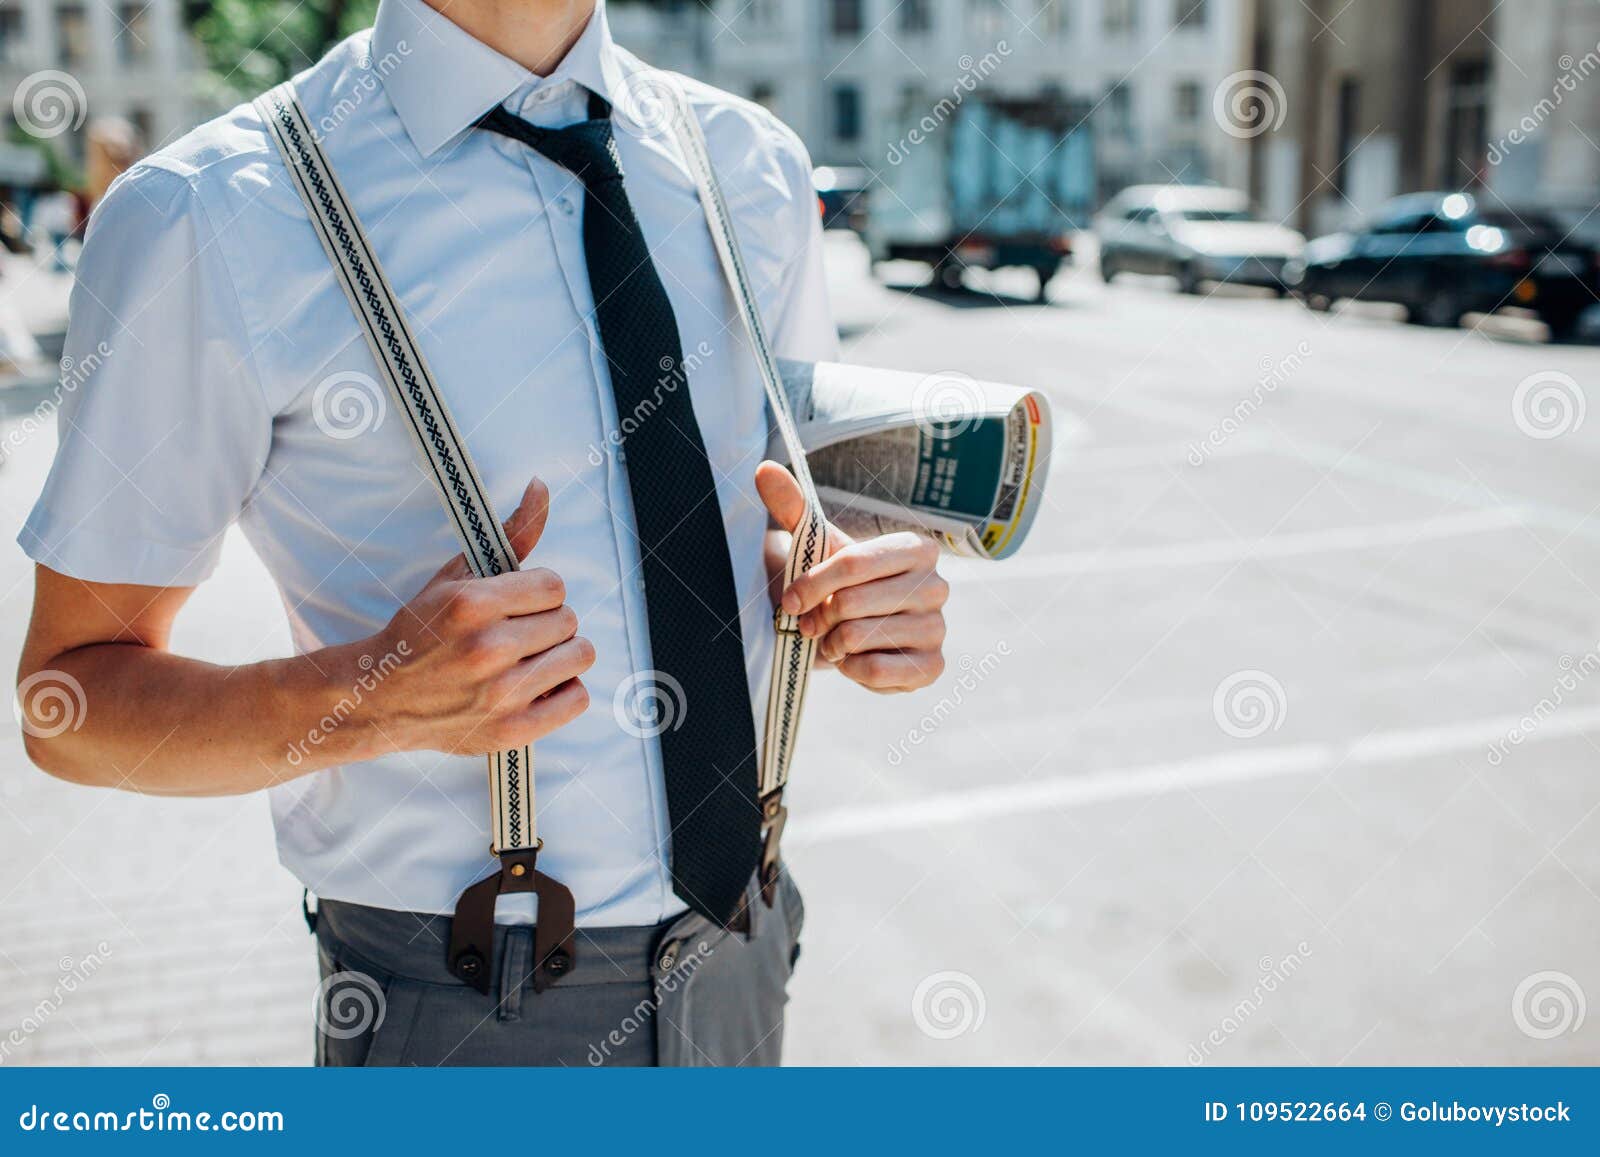 Hipster Business Dress Code Fashion Suspenders Stock Photo - Image of  relaxed, outside: 109522664